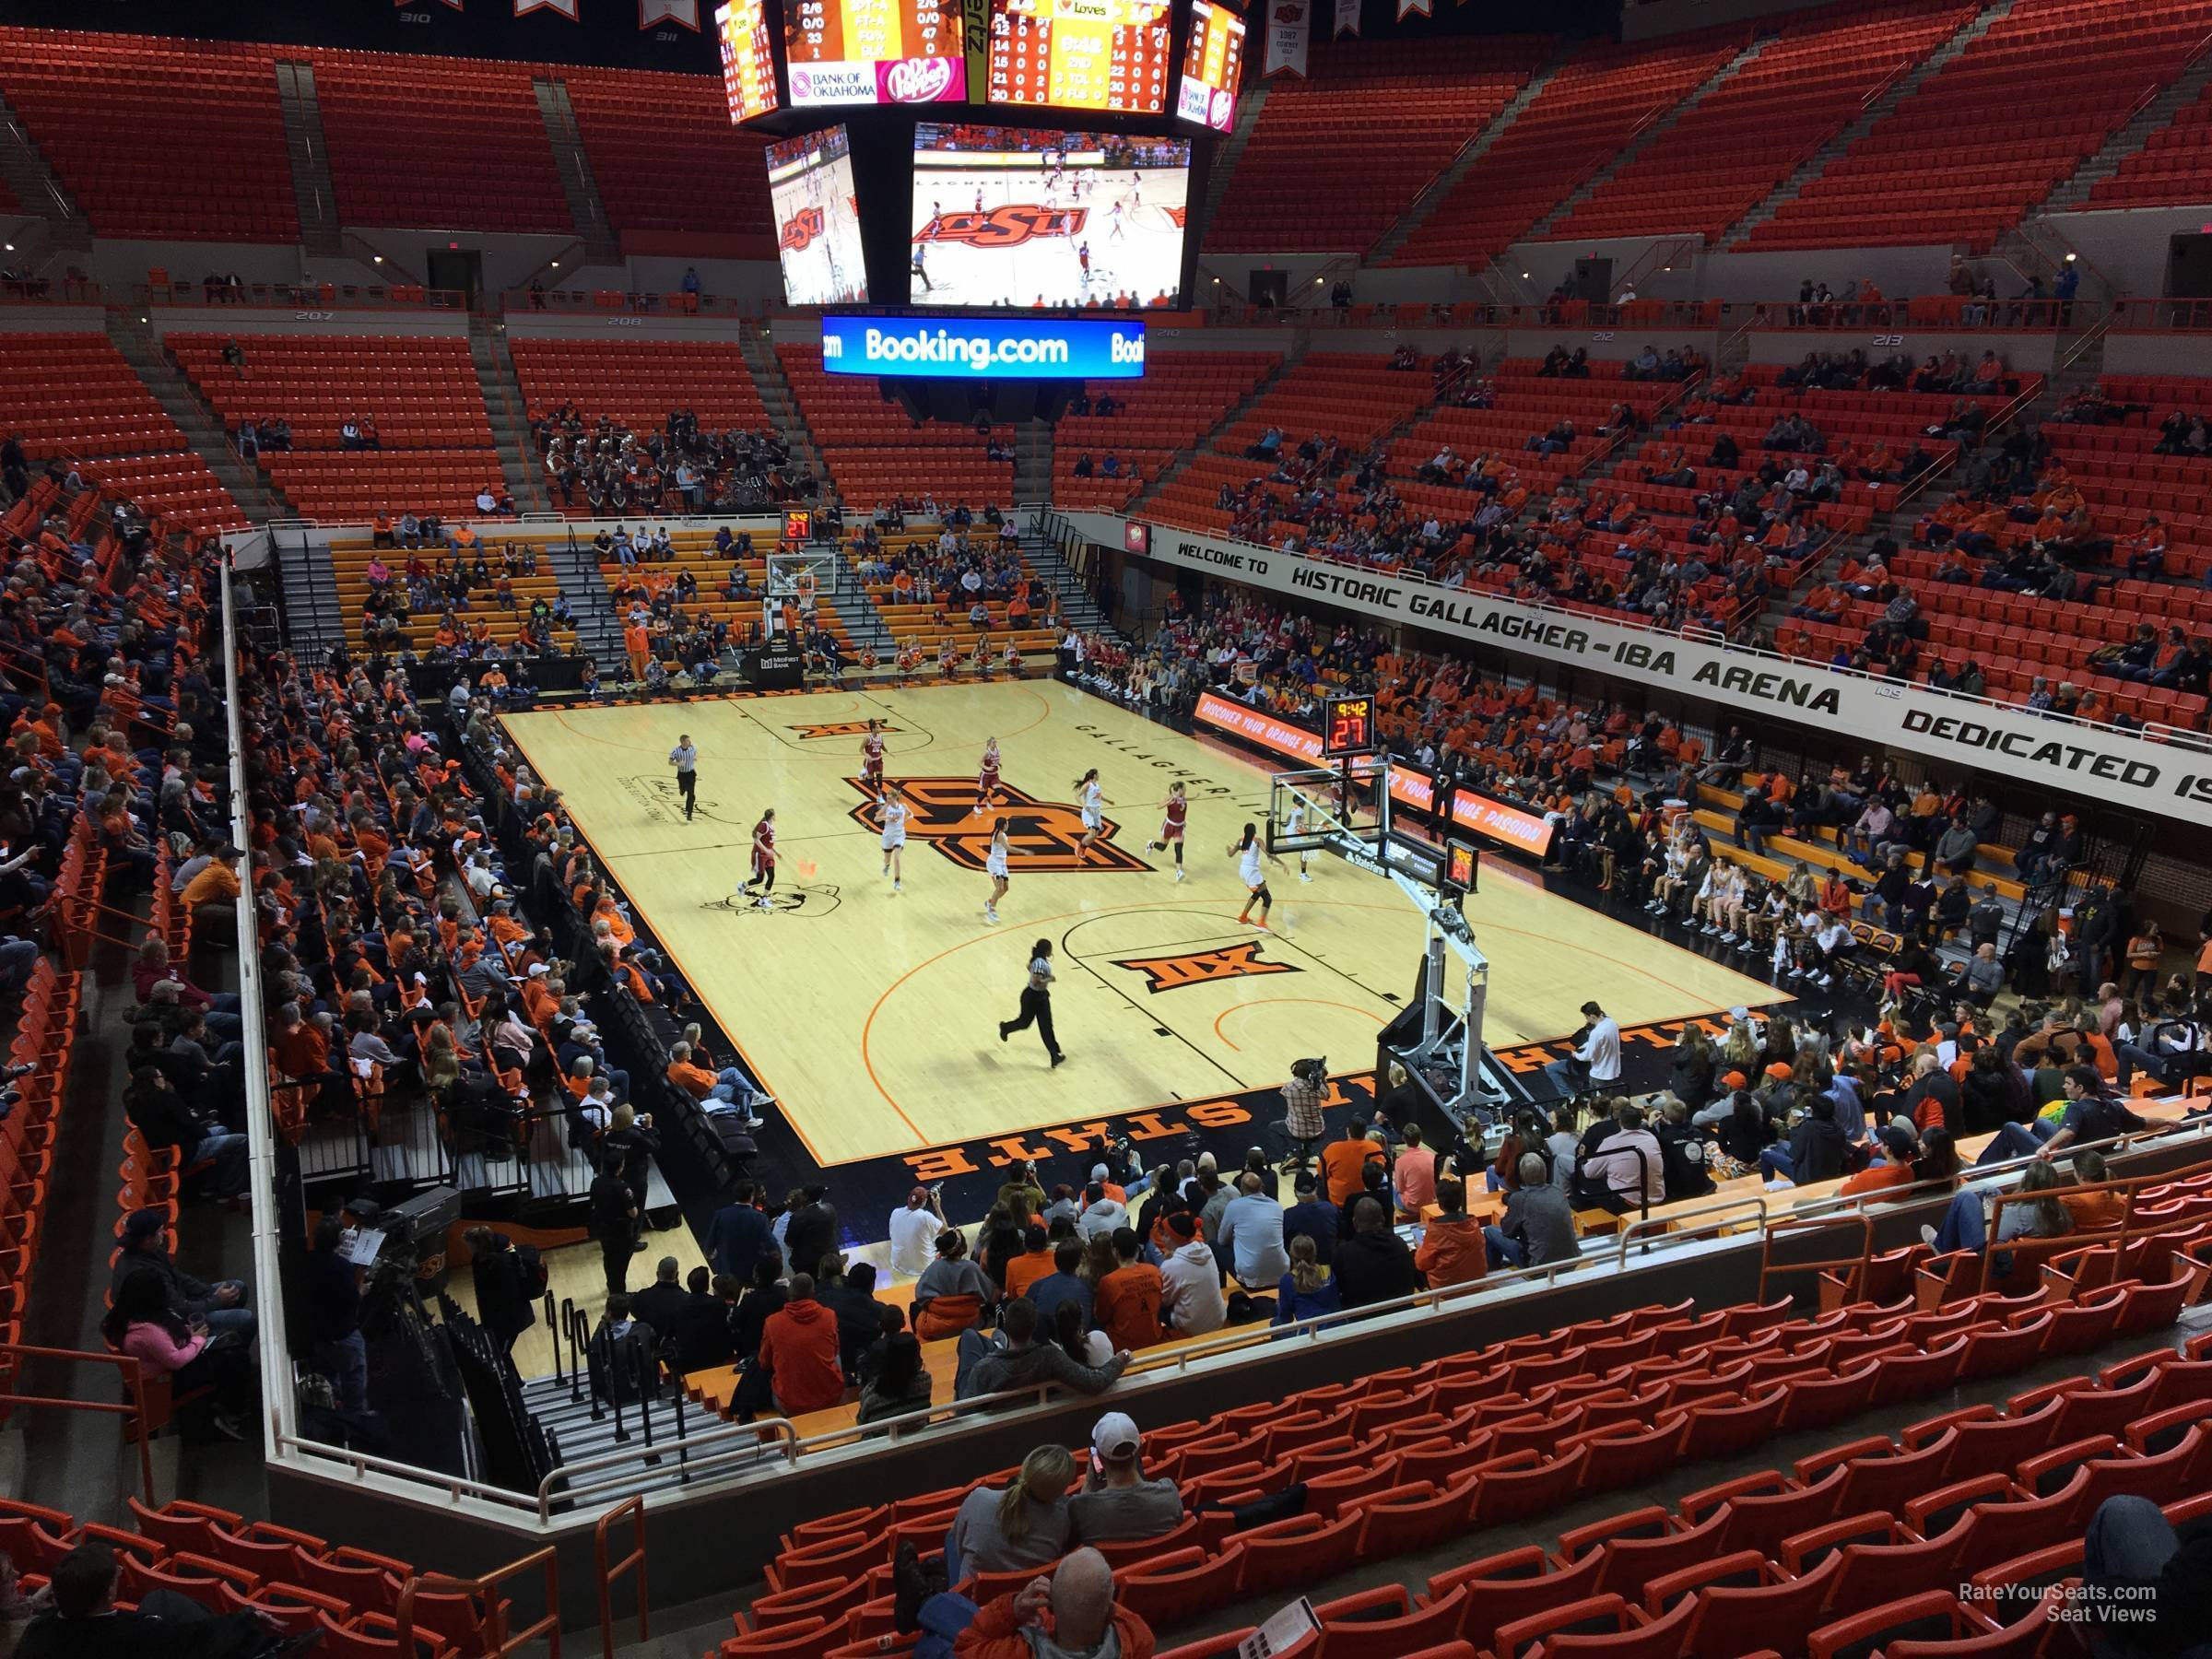 section 219, row 13 seat view  - gallagher-iba arena